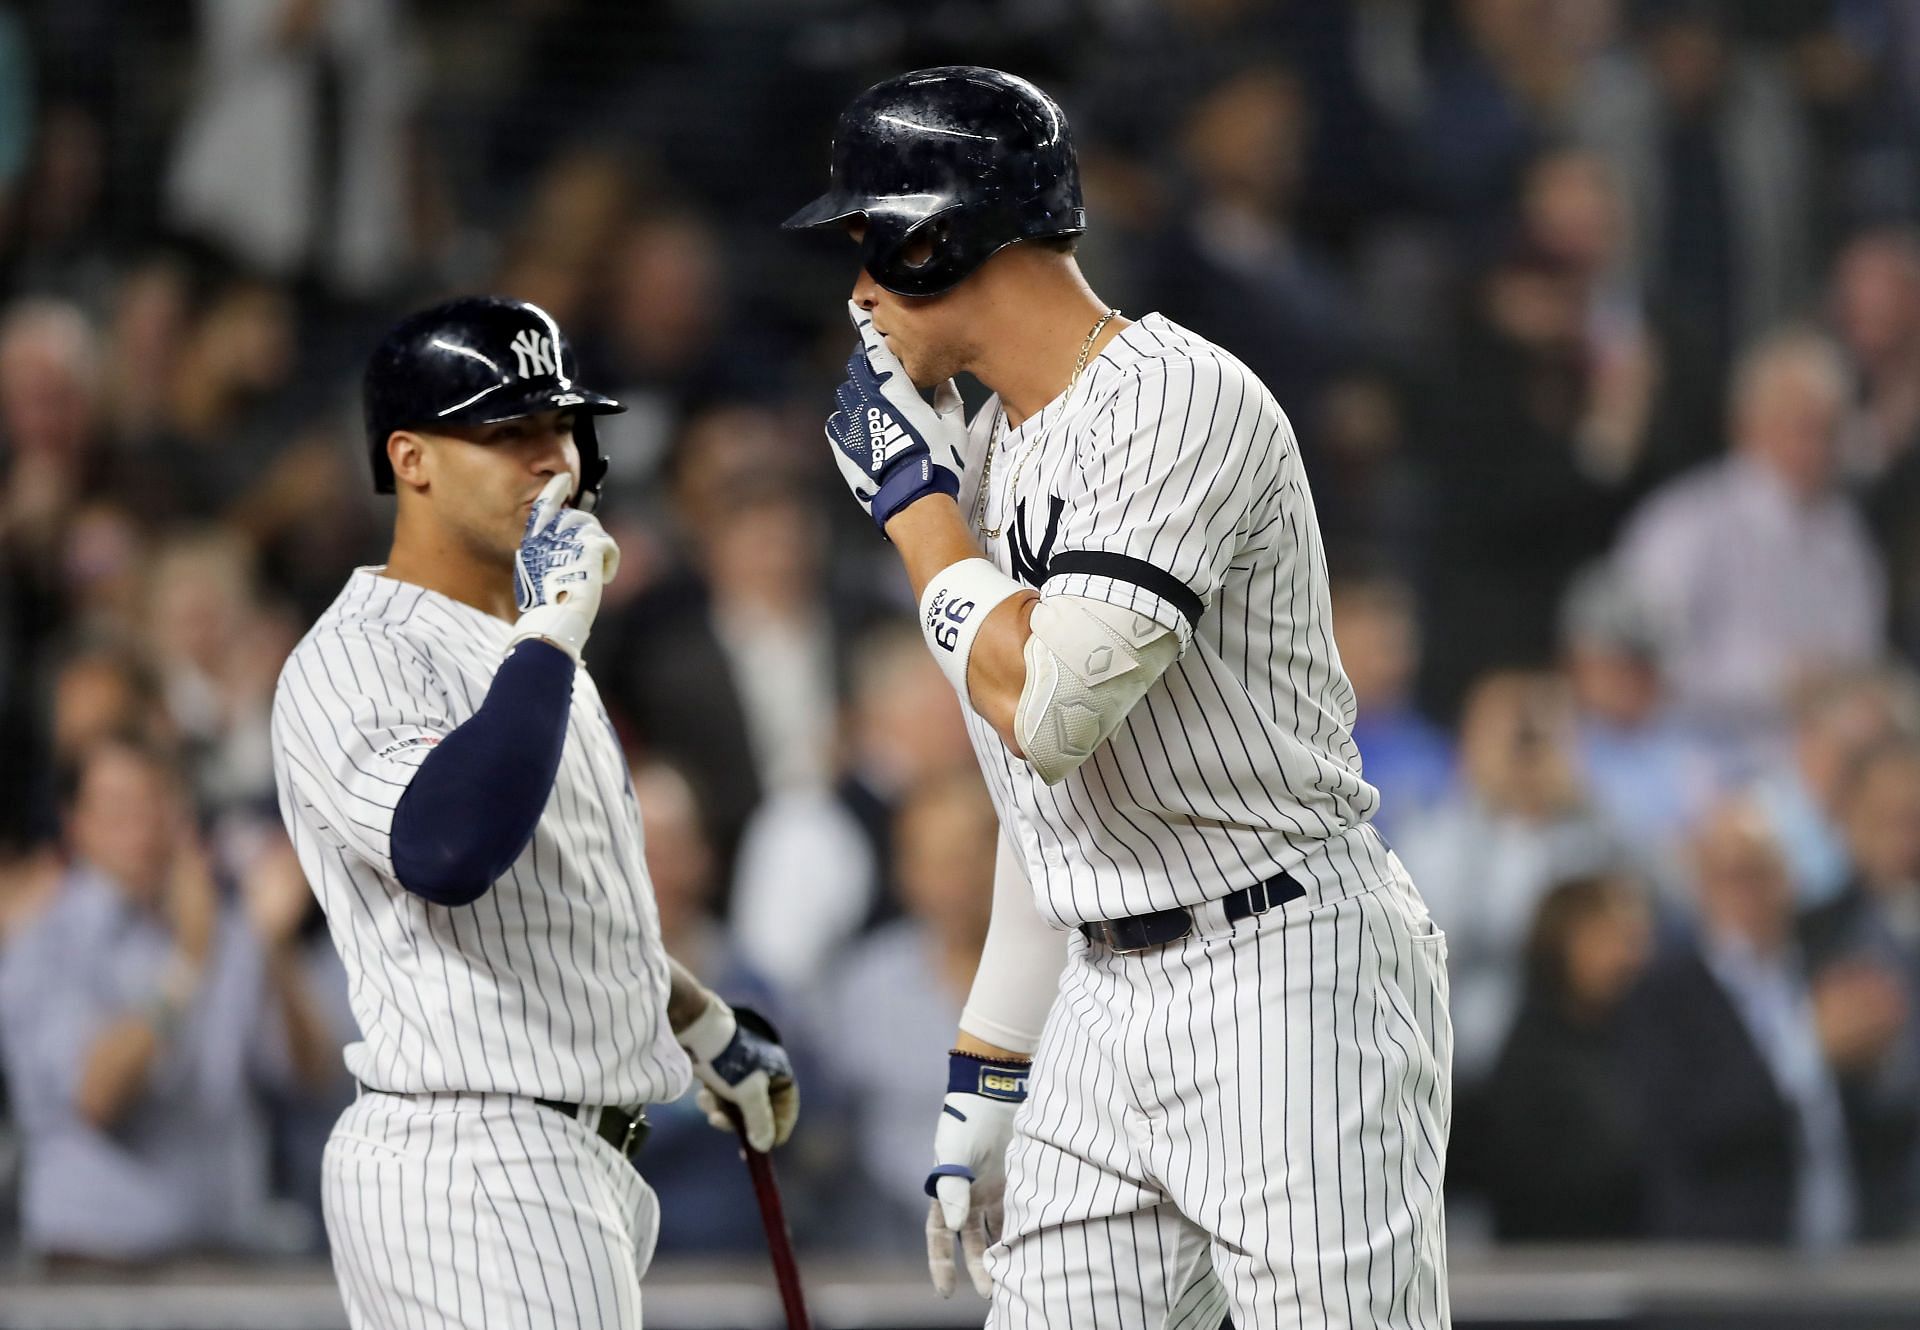 Gleyber Torres Stats, Profile, Bio, Analysis and More